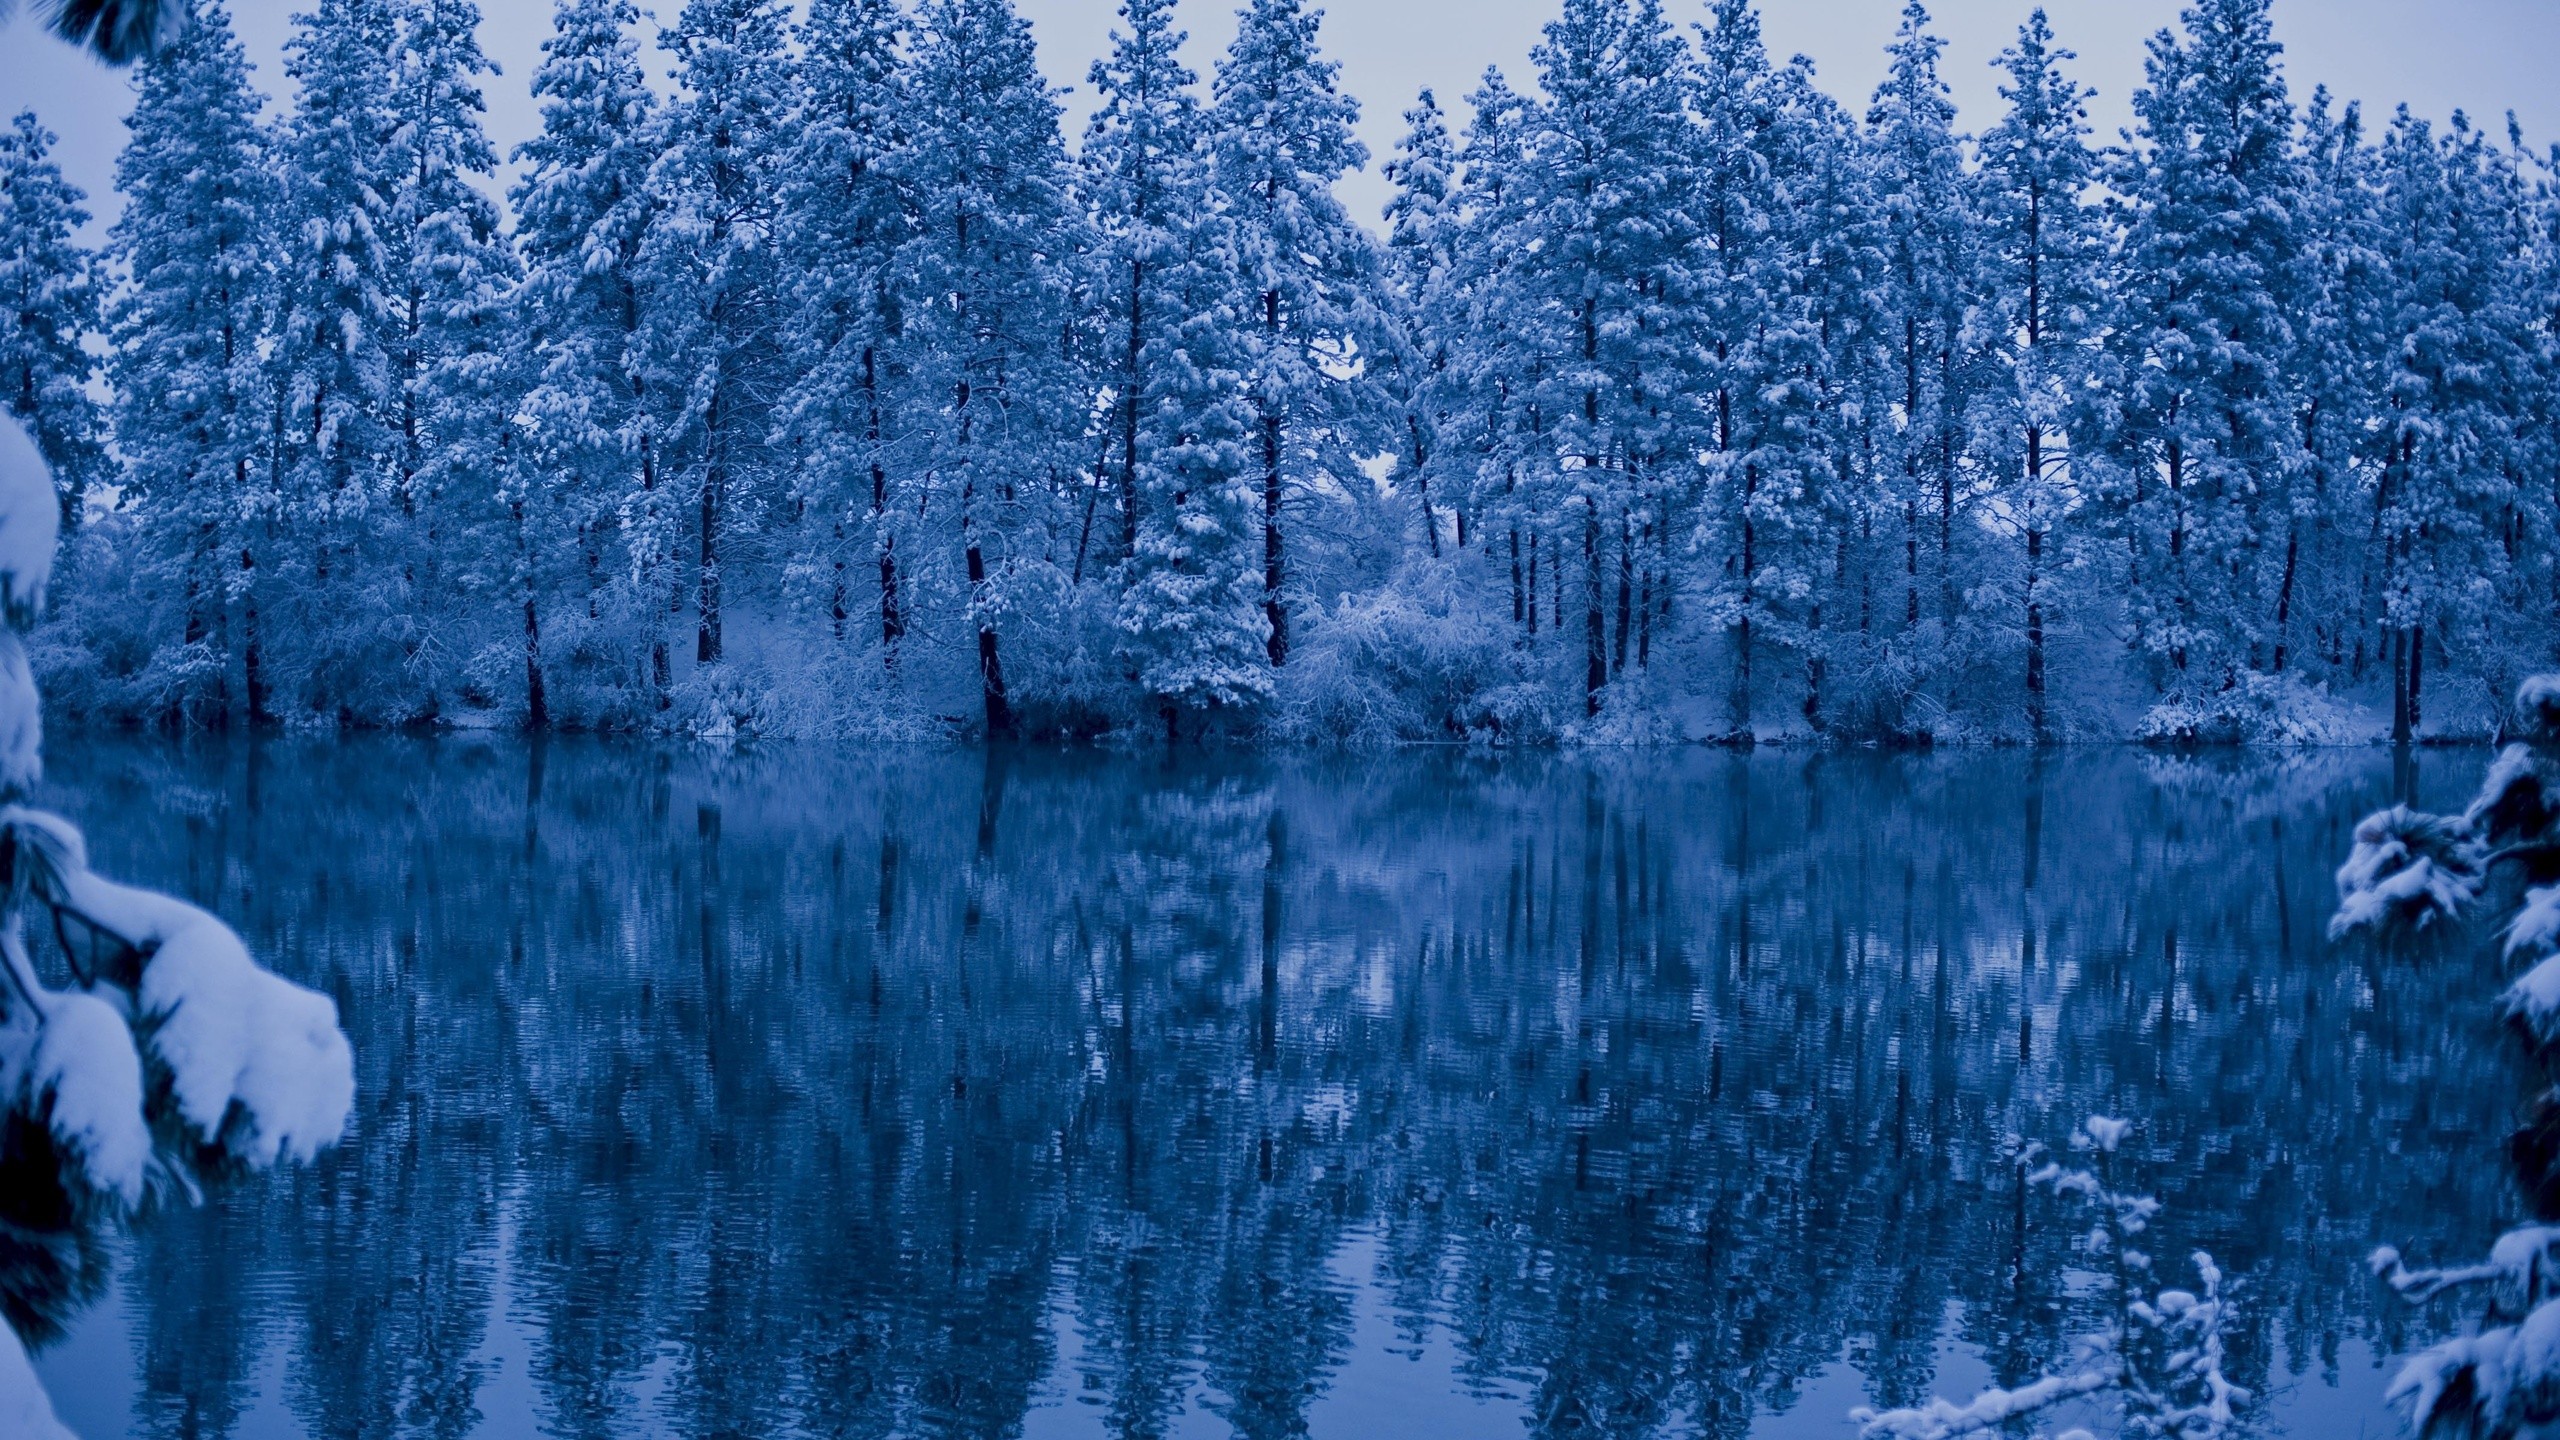 General 2560x1440 winter trees water reflection snow